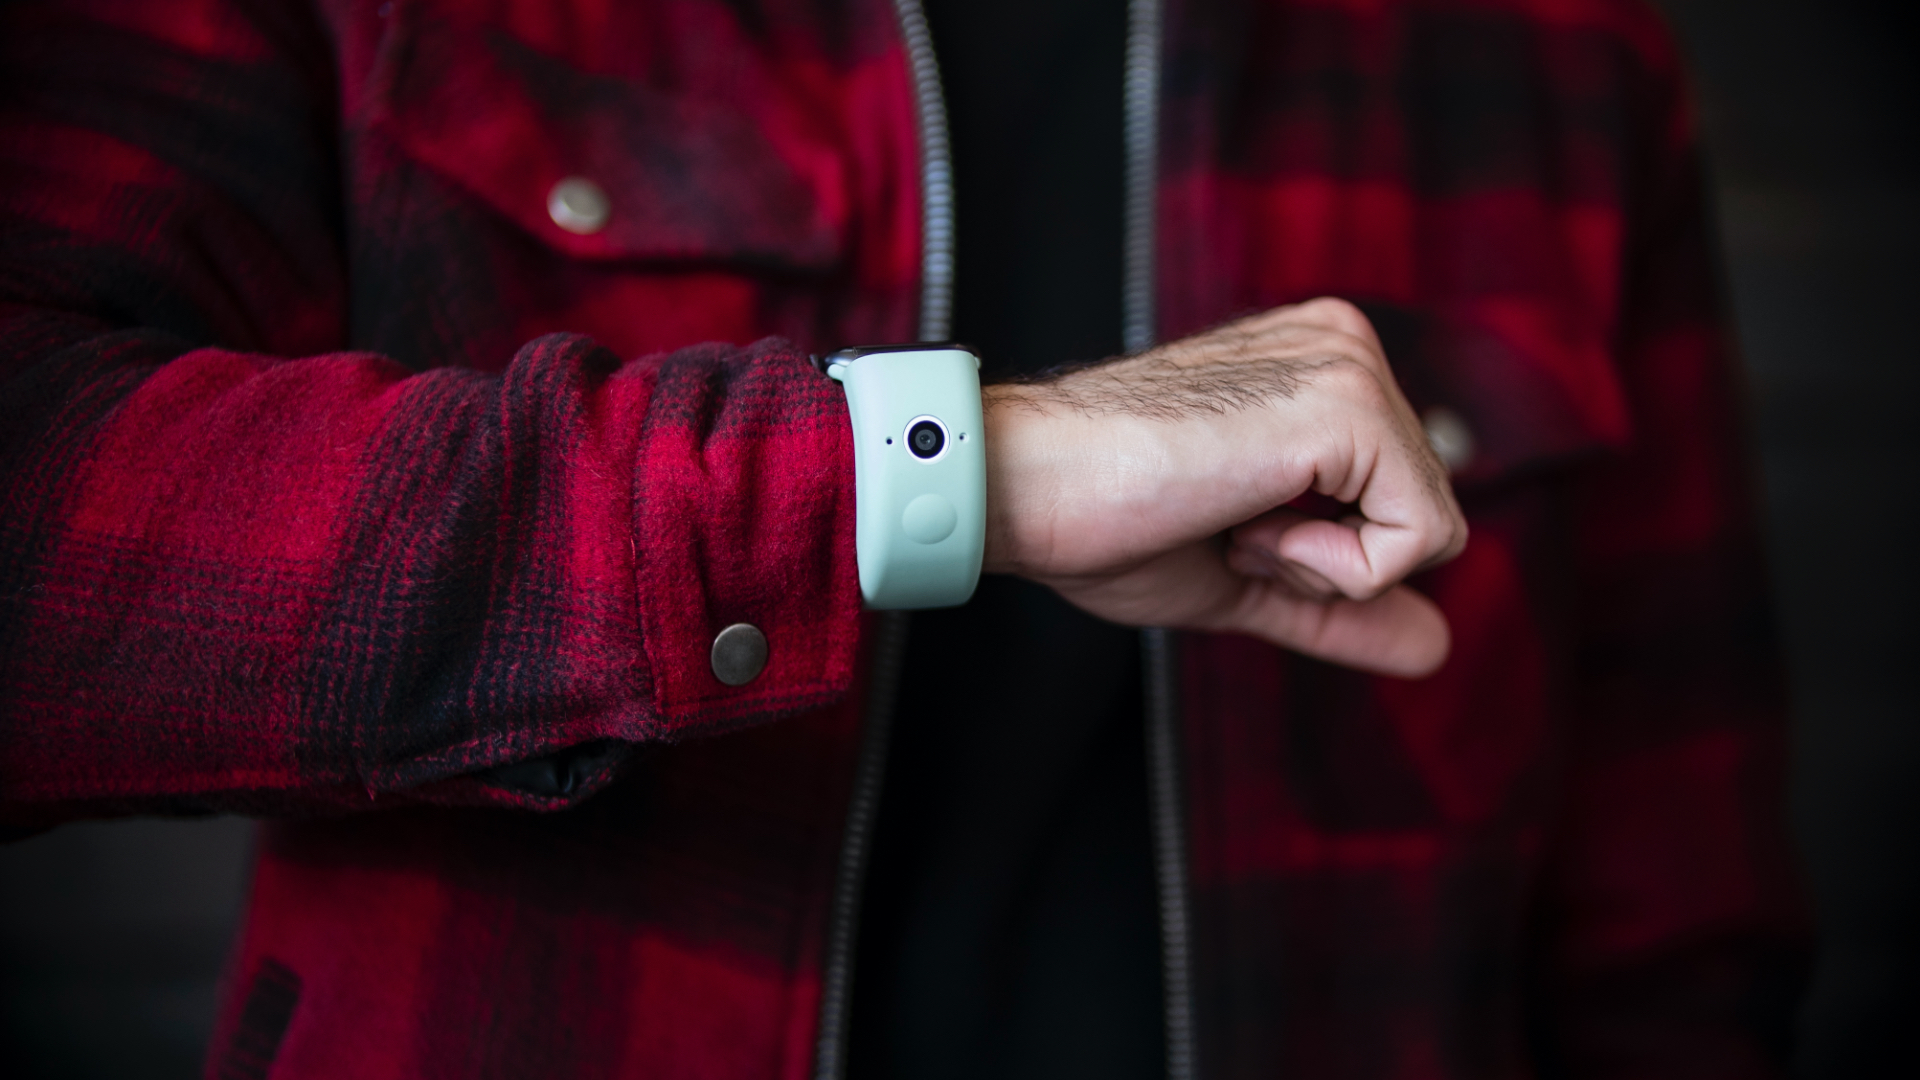 Wristcam sports an 8-megapixel world-facing lens with LED lights that activate when you start shooting and a physical button that acts as a trigger. (Photo: Wristcam)